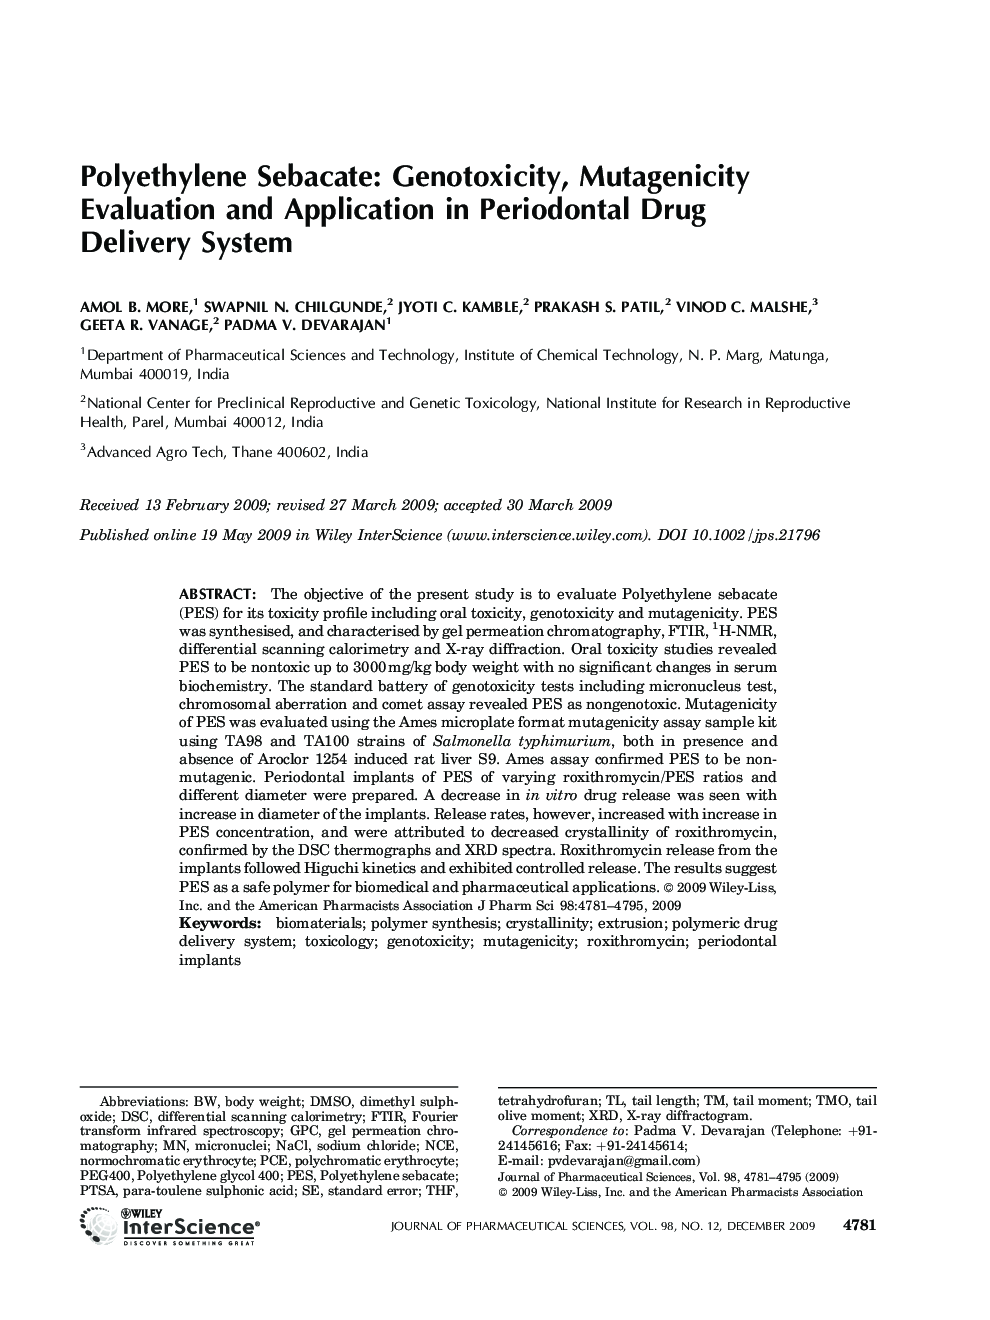 Polyethylene sebacate: Genotoxicity, mutagenicity evaluation and application in periodontal drug delivery system